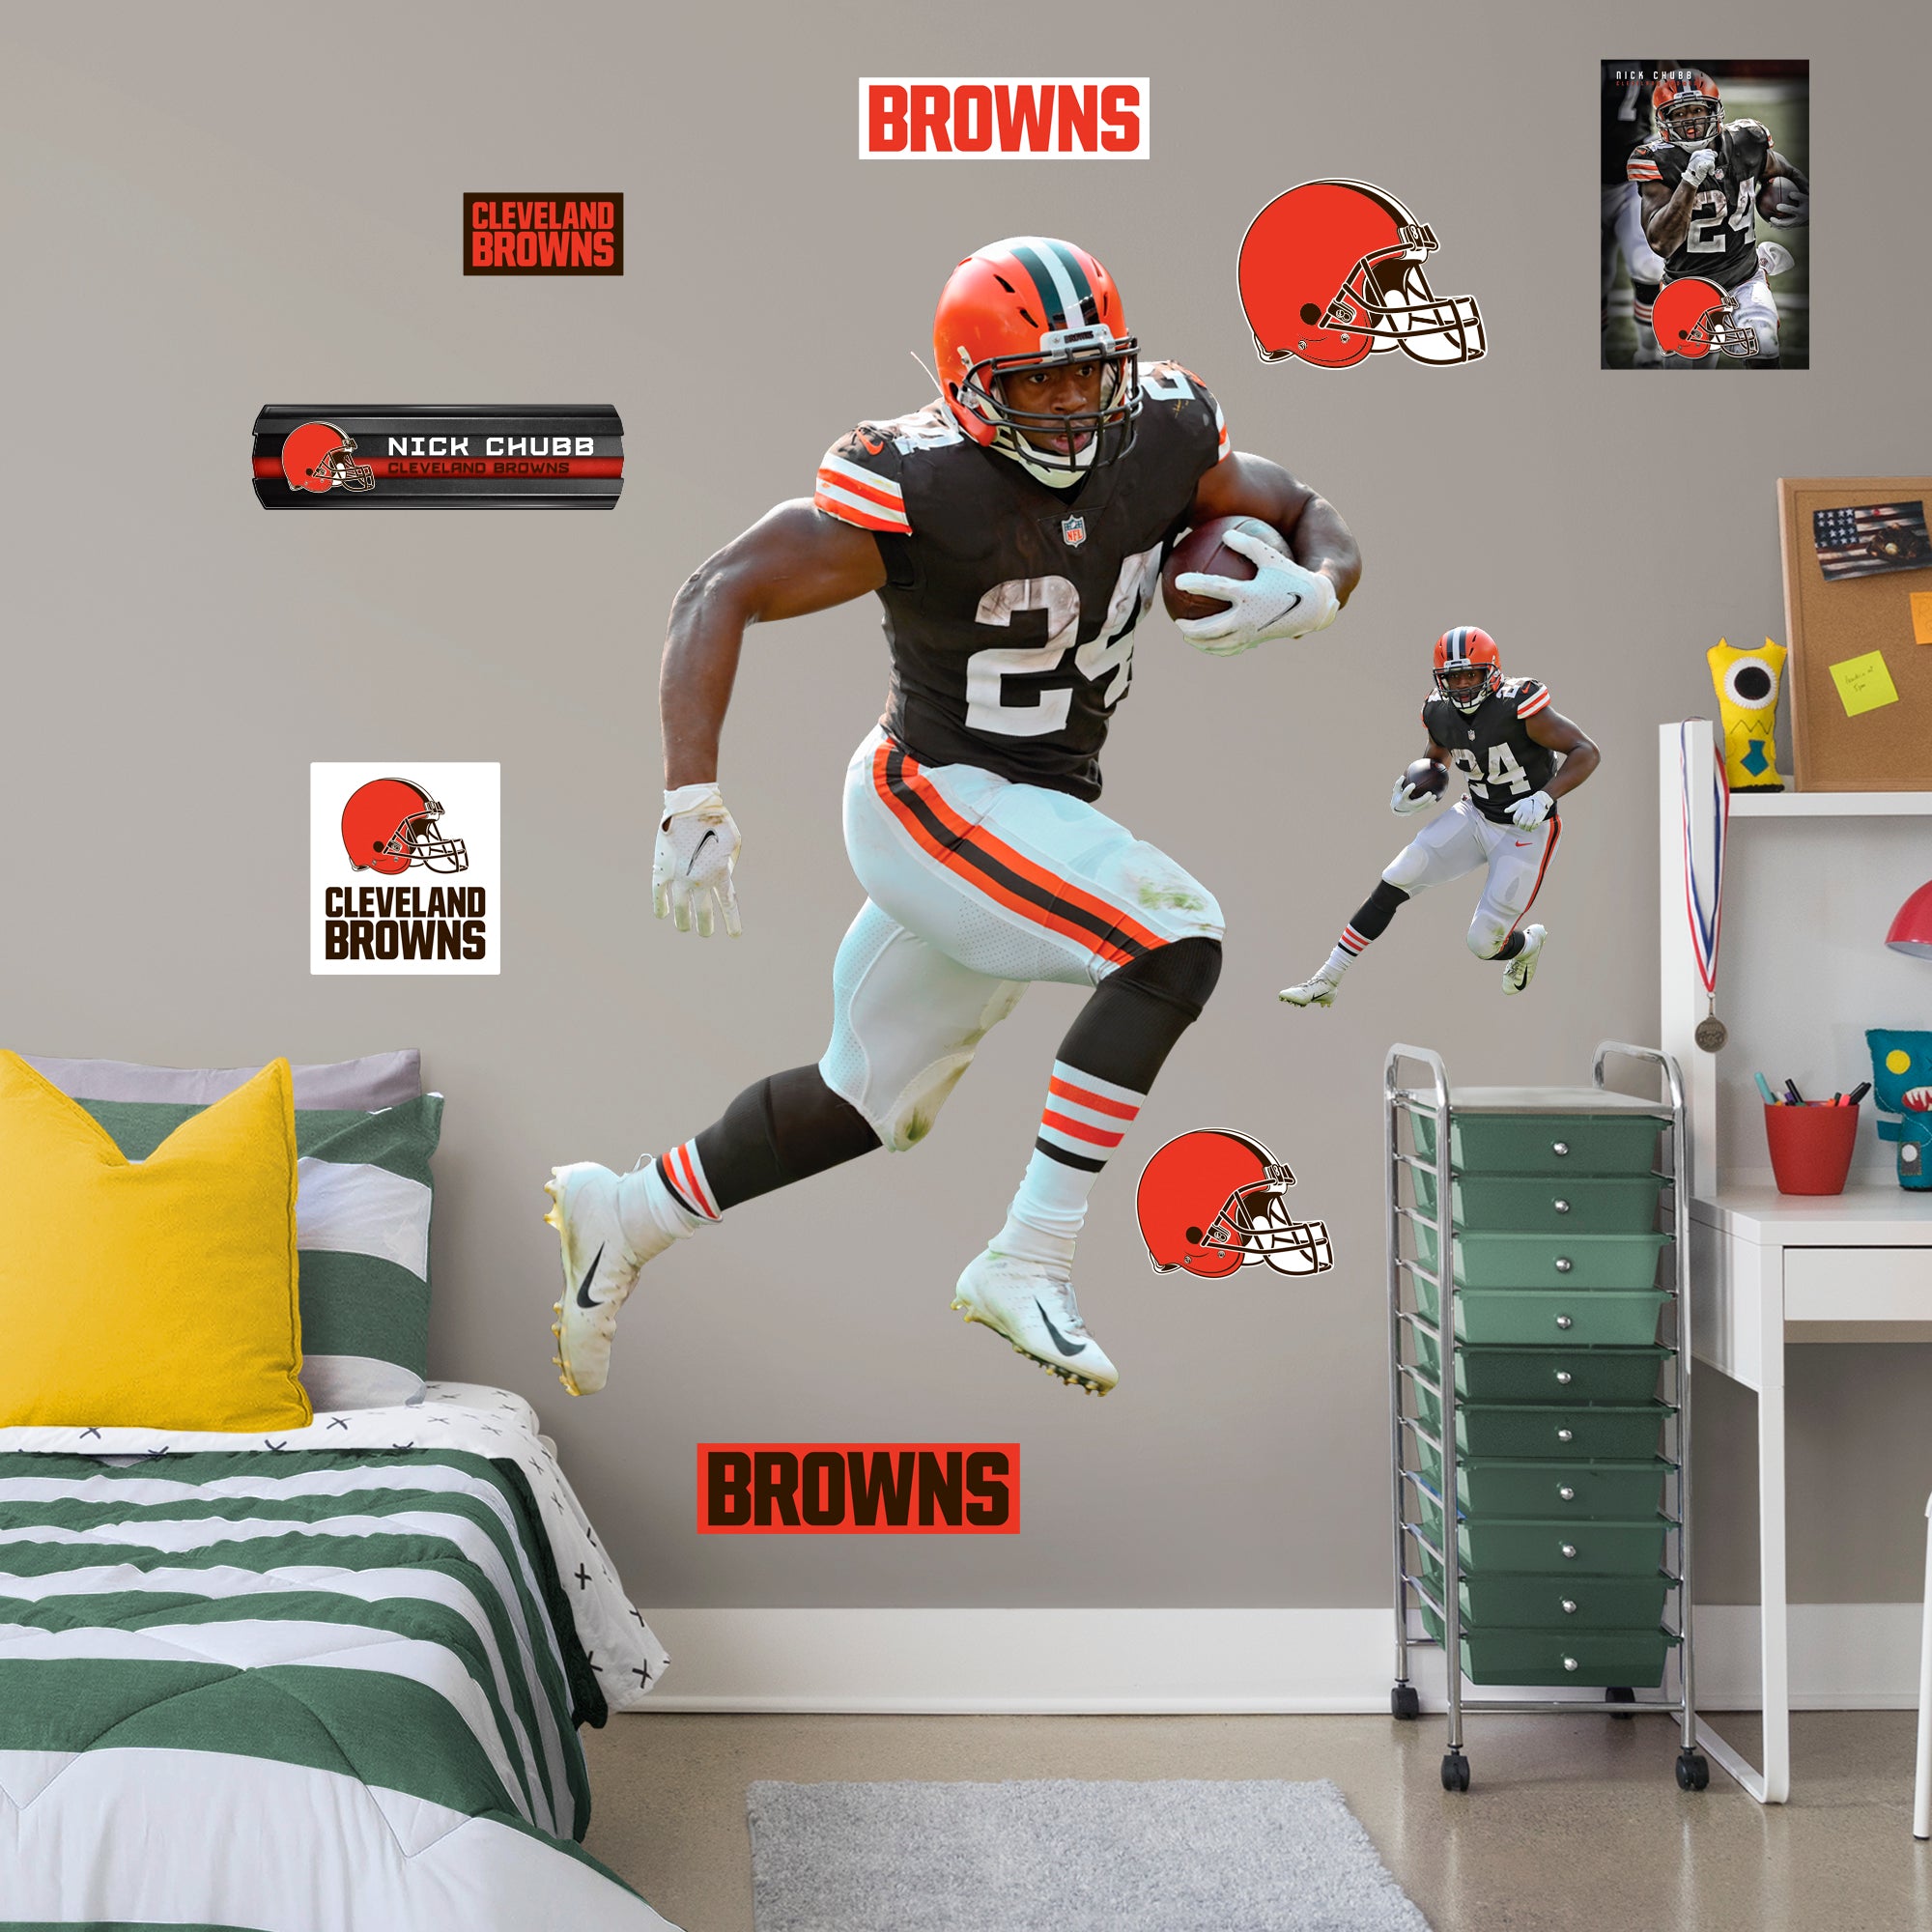 Nick Chubb 2020 - Officially Licensed NFL Removable Wall Decal Life-Size Athlete + 9 Decals (51"W x 72.5"H) by Fathead | Vinyl